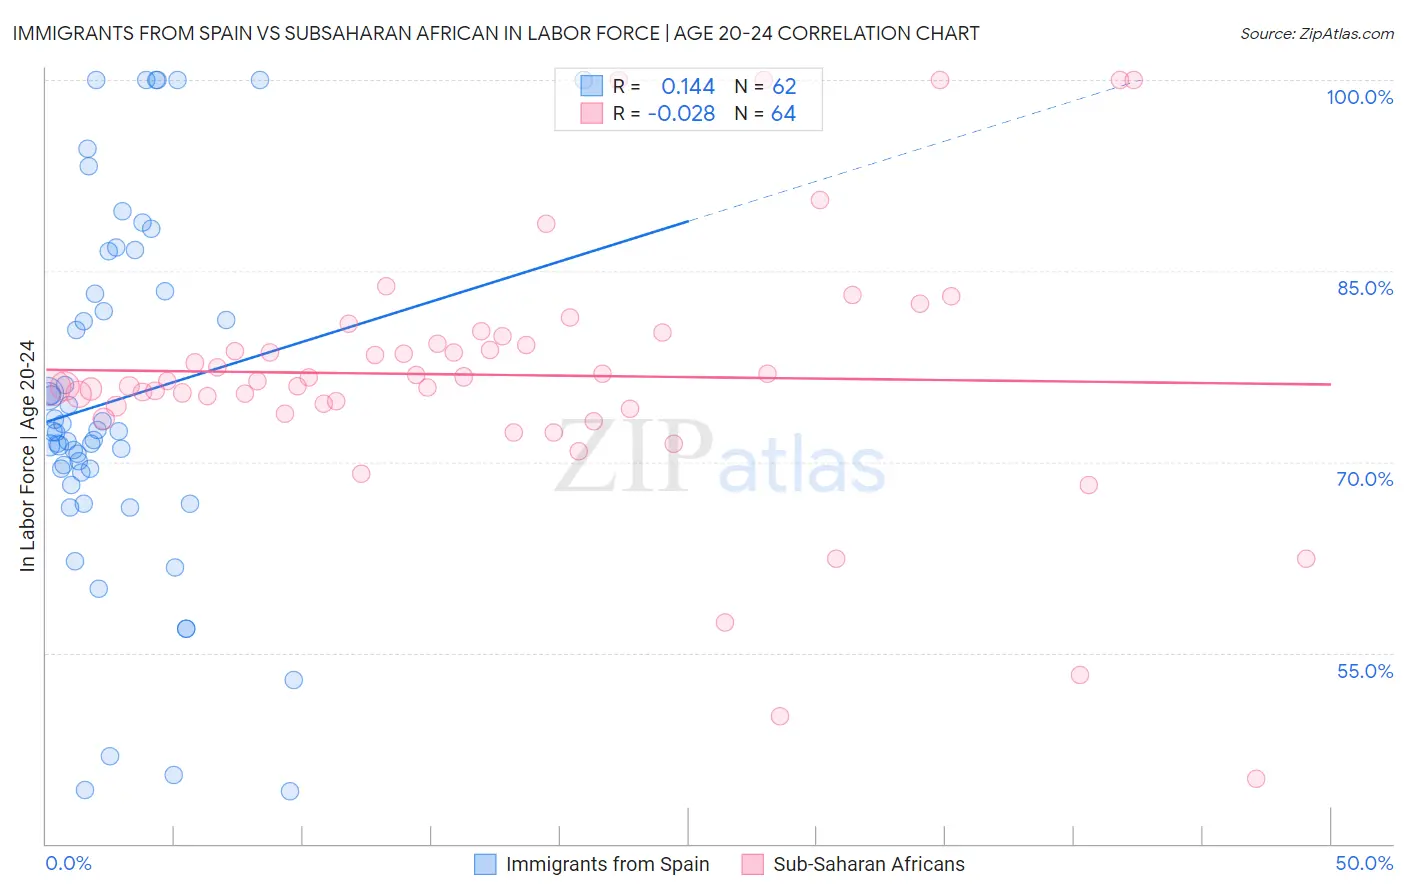 Immigrants from Spain vs Subsaharan African In Labor Force | Age 20-24